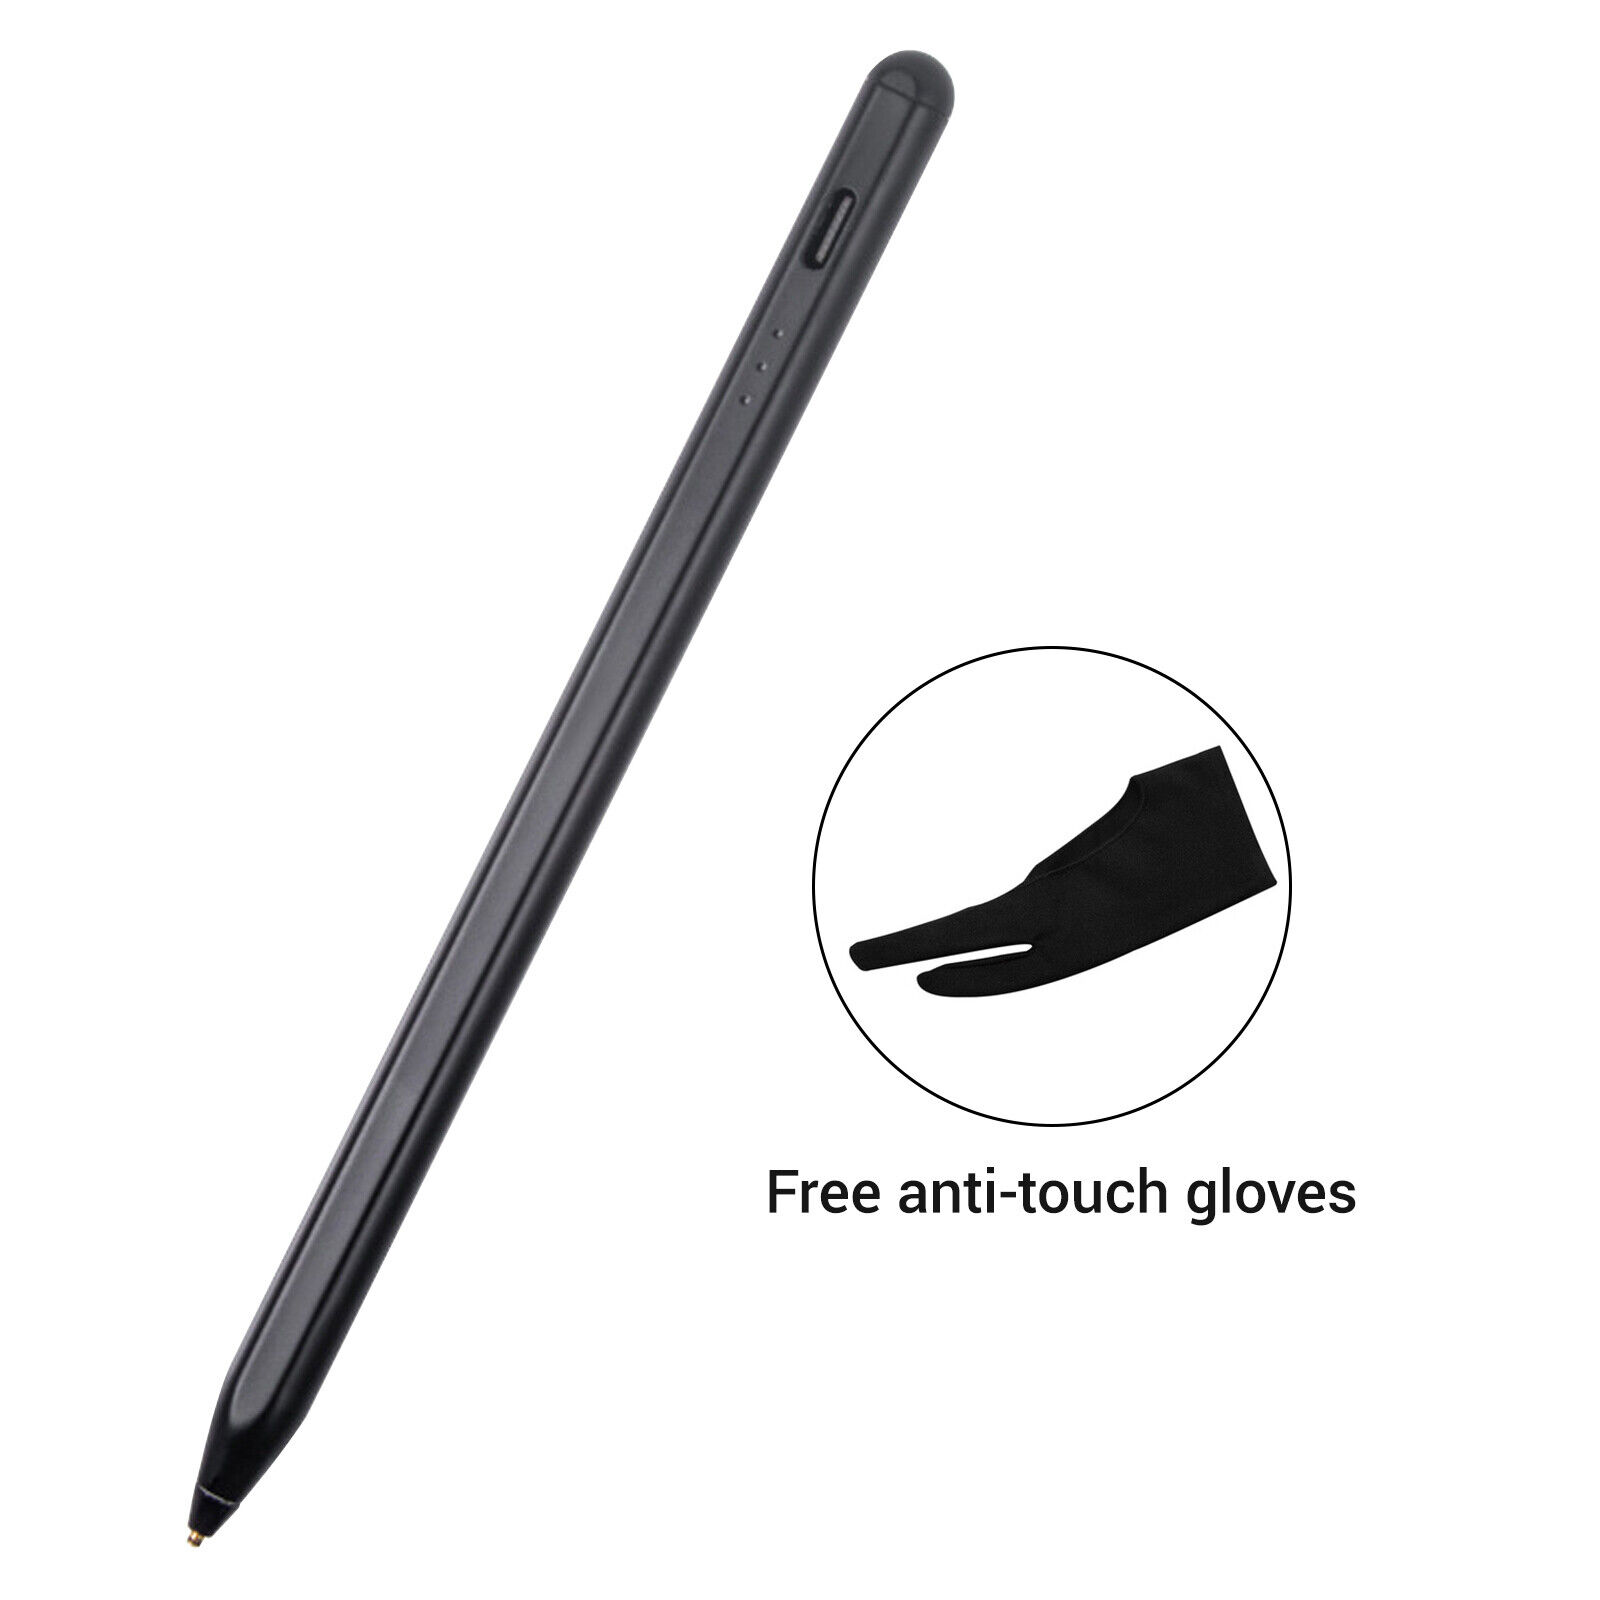 For Samsung Galaxy Tab A8/A9/A9+/S6 Lite/S8/S7/S9 Touch Screen Stylus Pen US